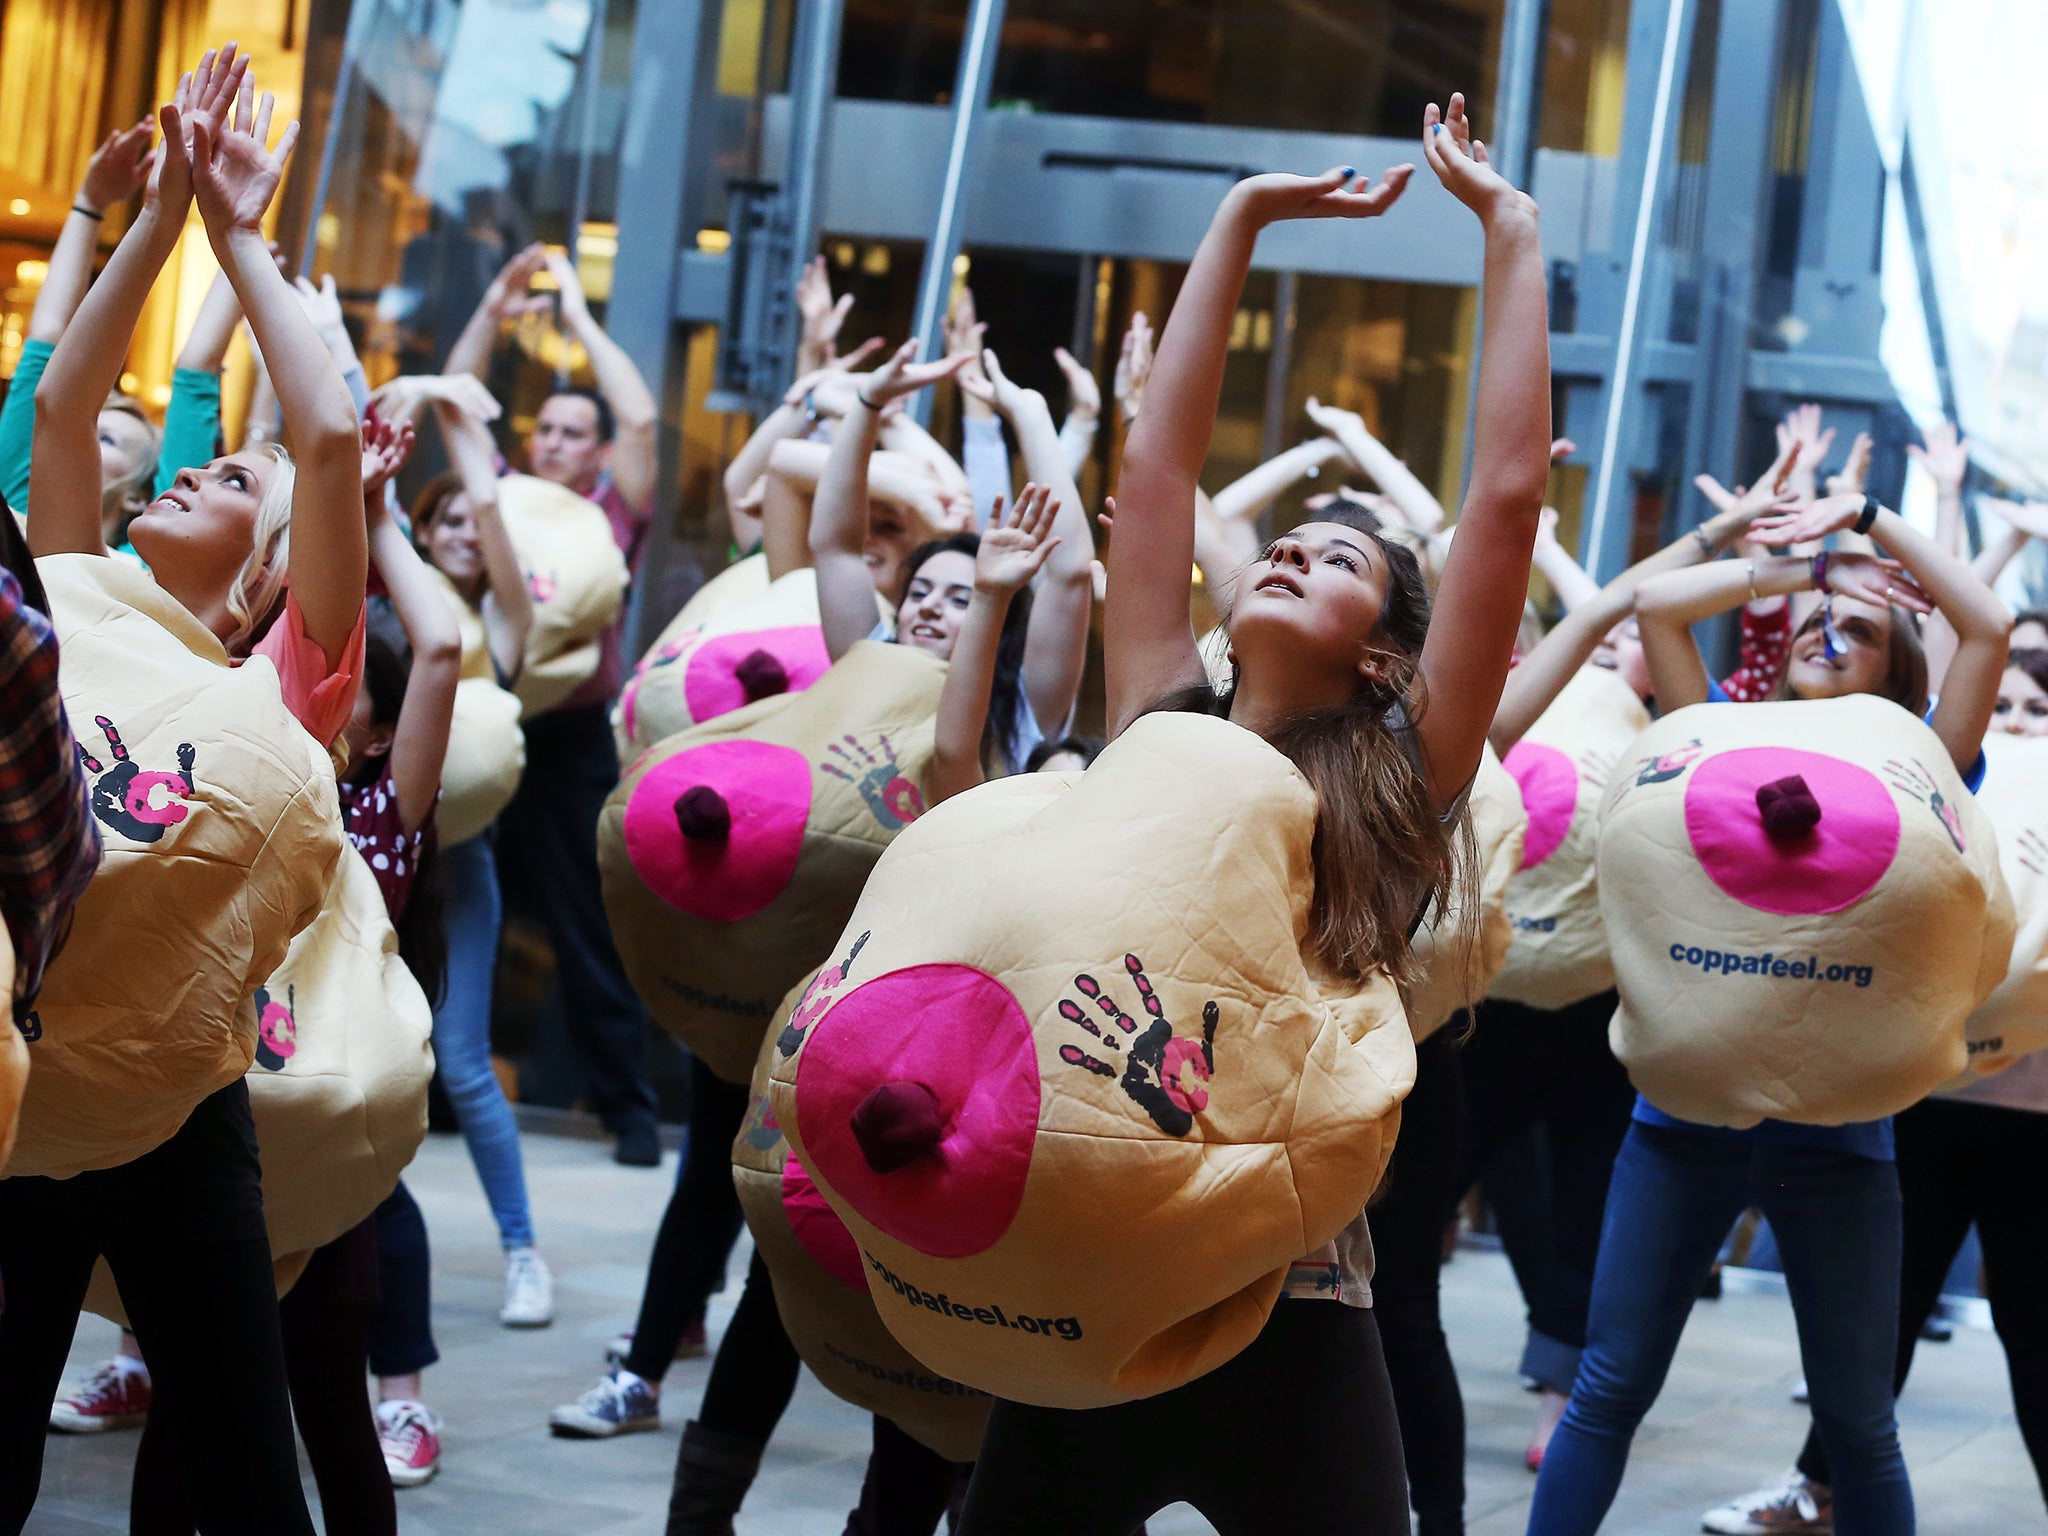 CoppaFeel! celebrated its 5th birthday with a flash mob in London in 2014